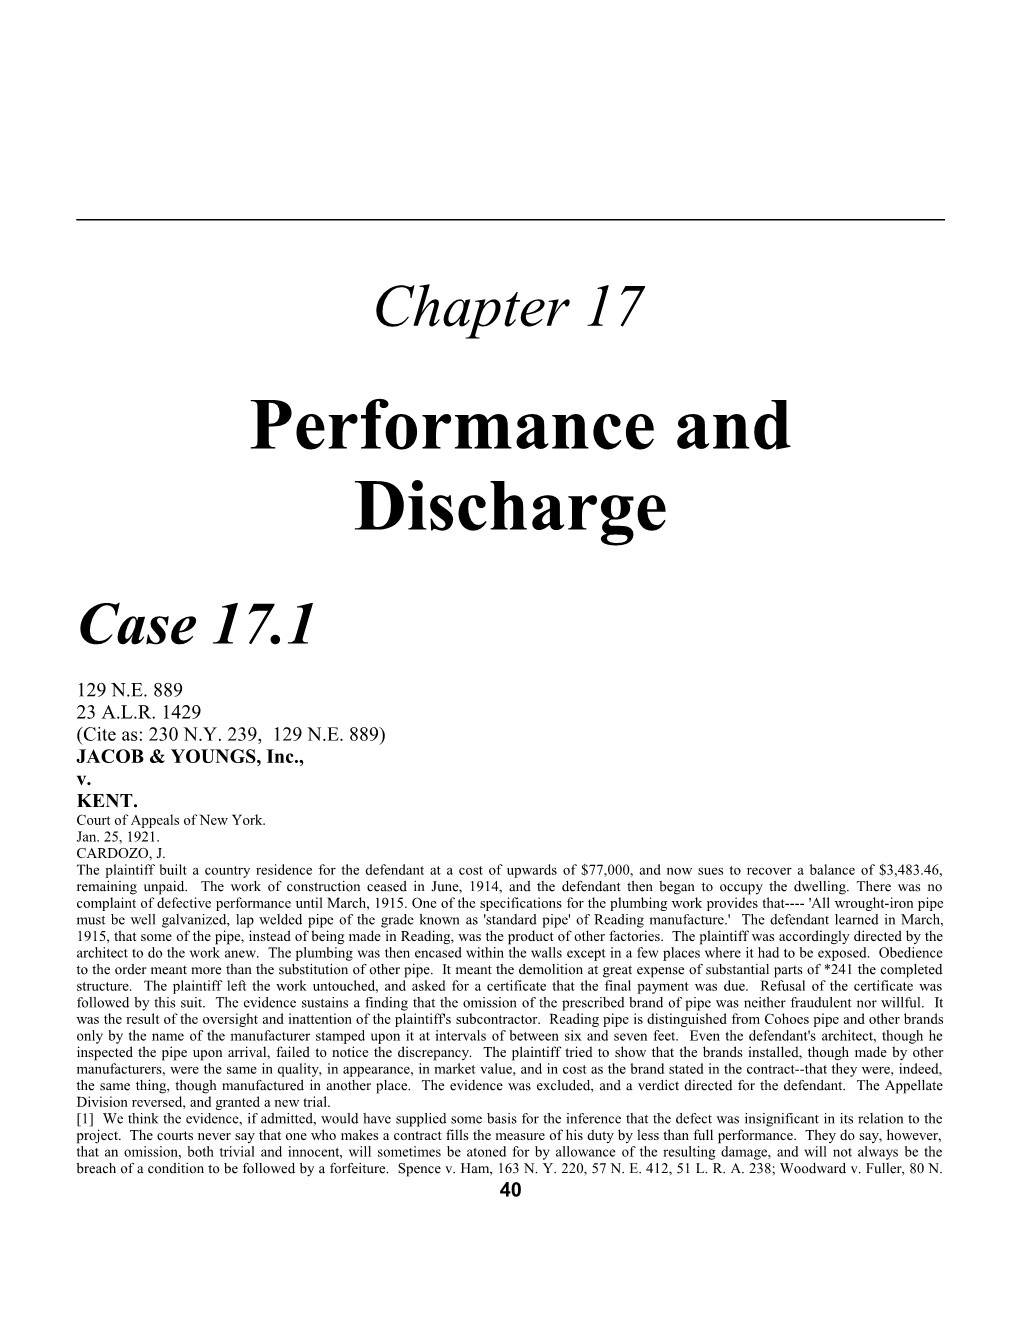 Chapter 17: Performance and Discharge 1